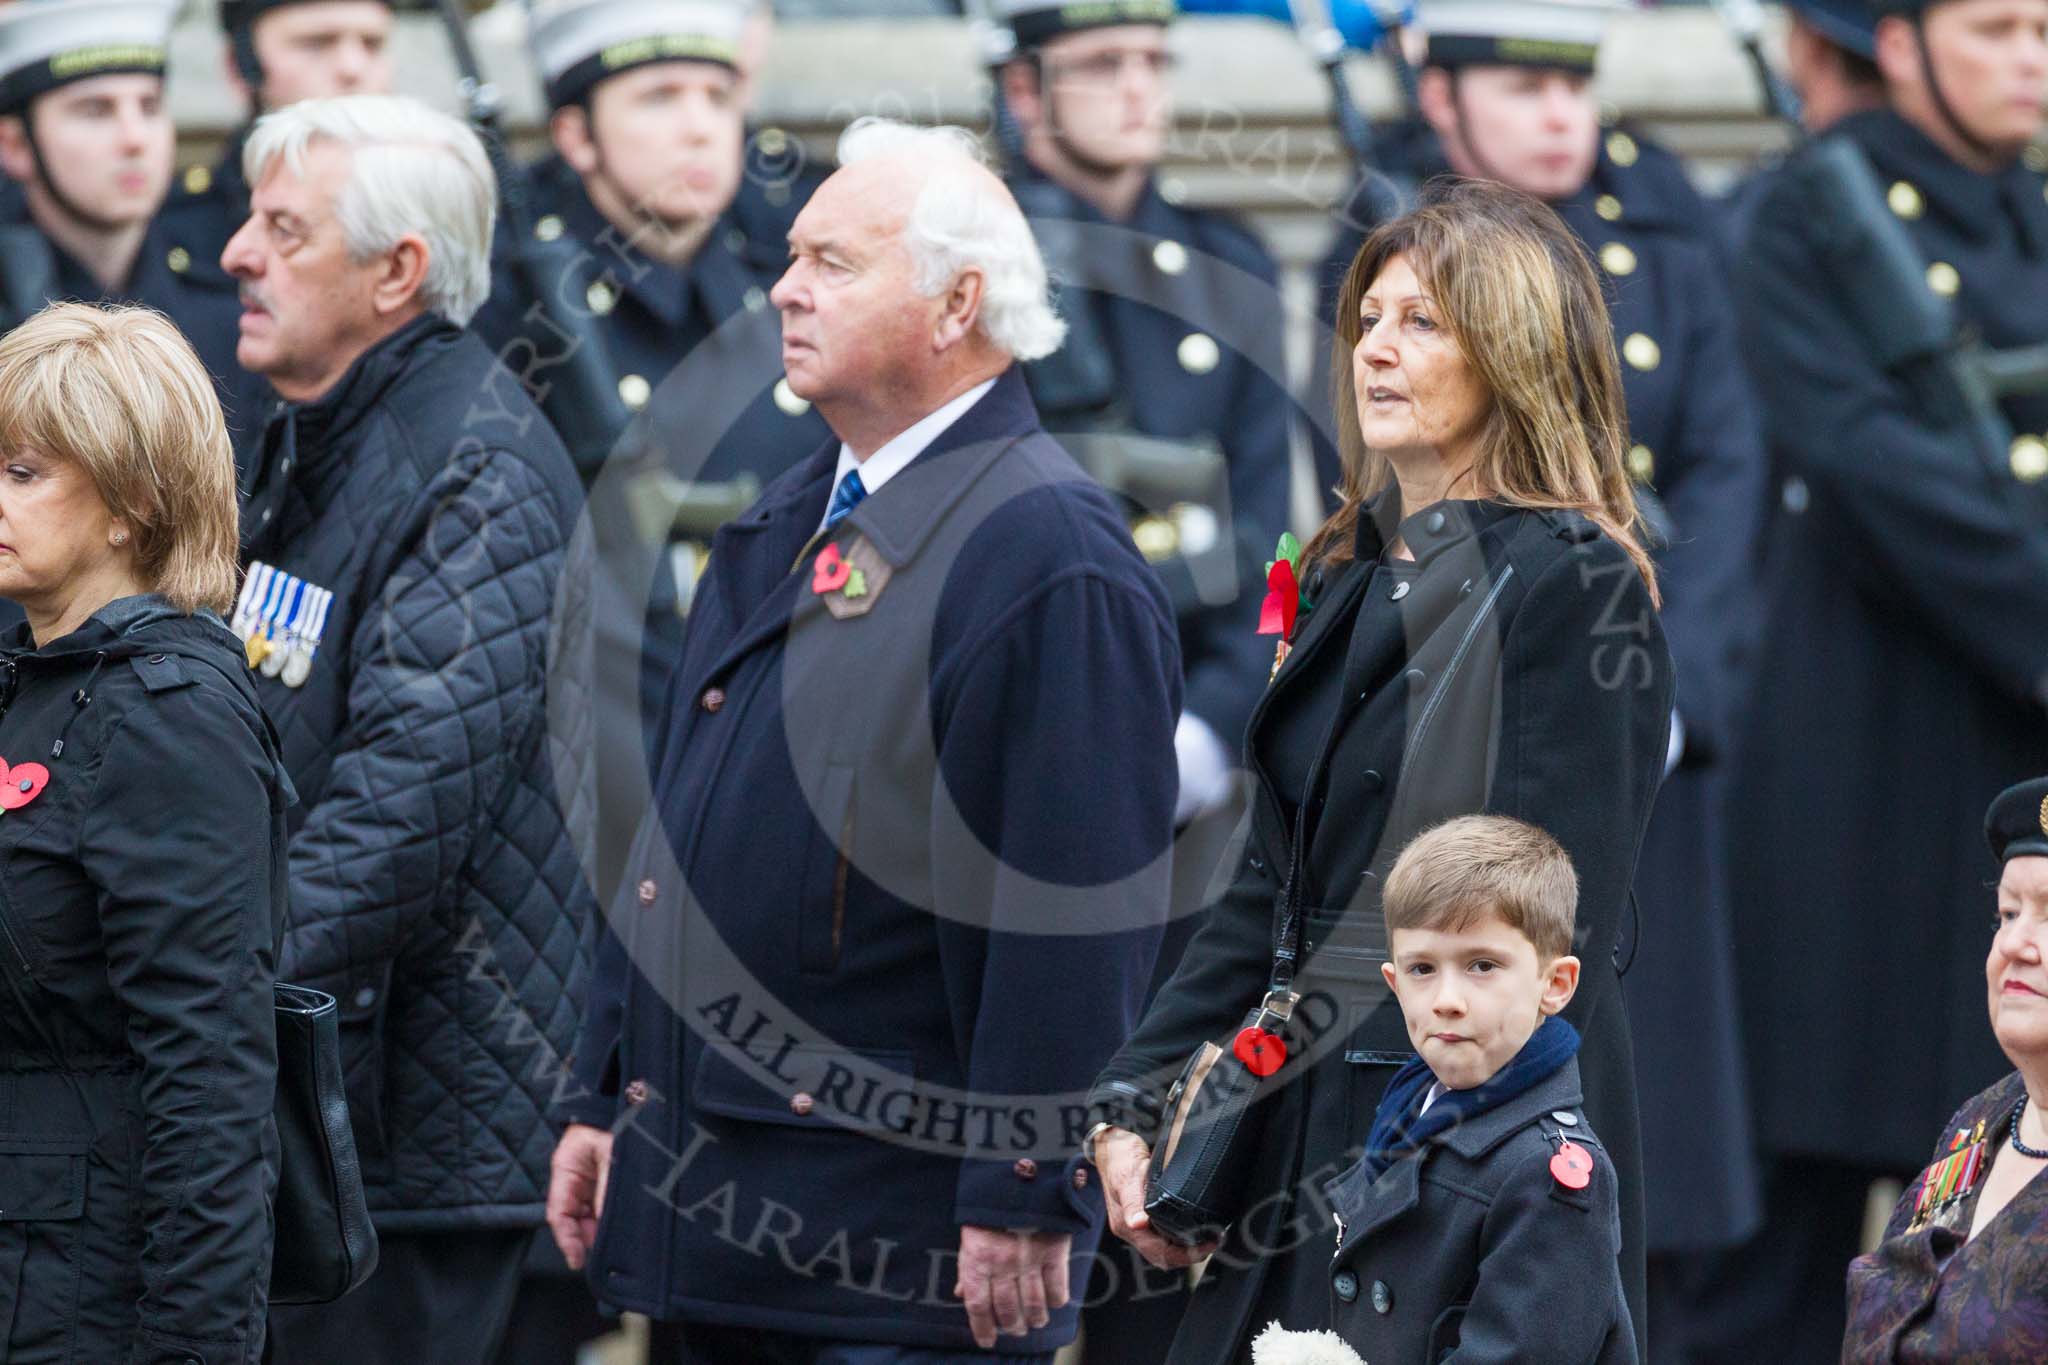 Remembrance Sunday at the Cenotaph 2015: Group F4, Monte Cassino Society.
Cenotaph, Whitehall, London SW1,
London,
Greater London,
United Kingdom,
on 08 November 2015 at 12:04, image #1022